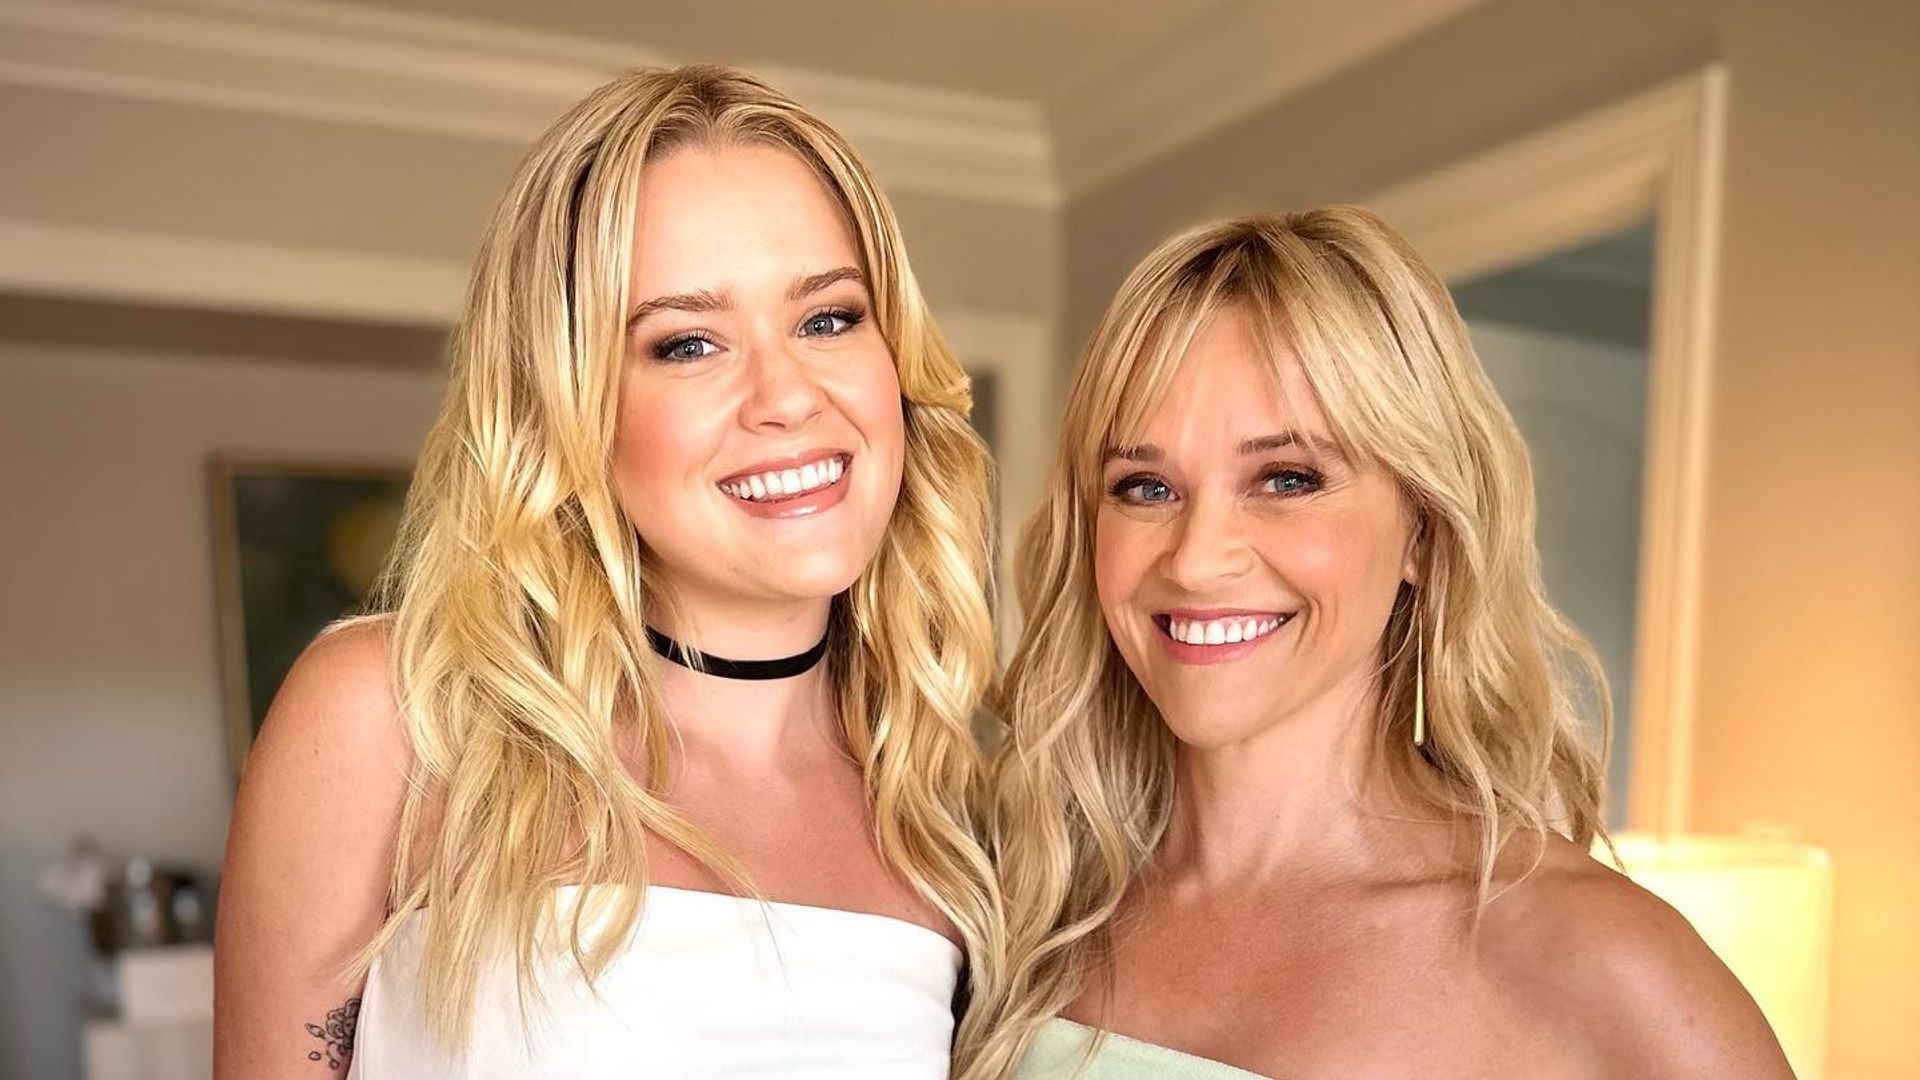 Ava Philippe and Reese Witherspoon smiling